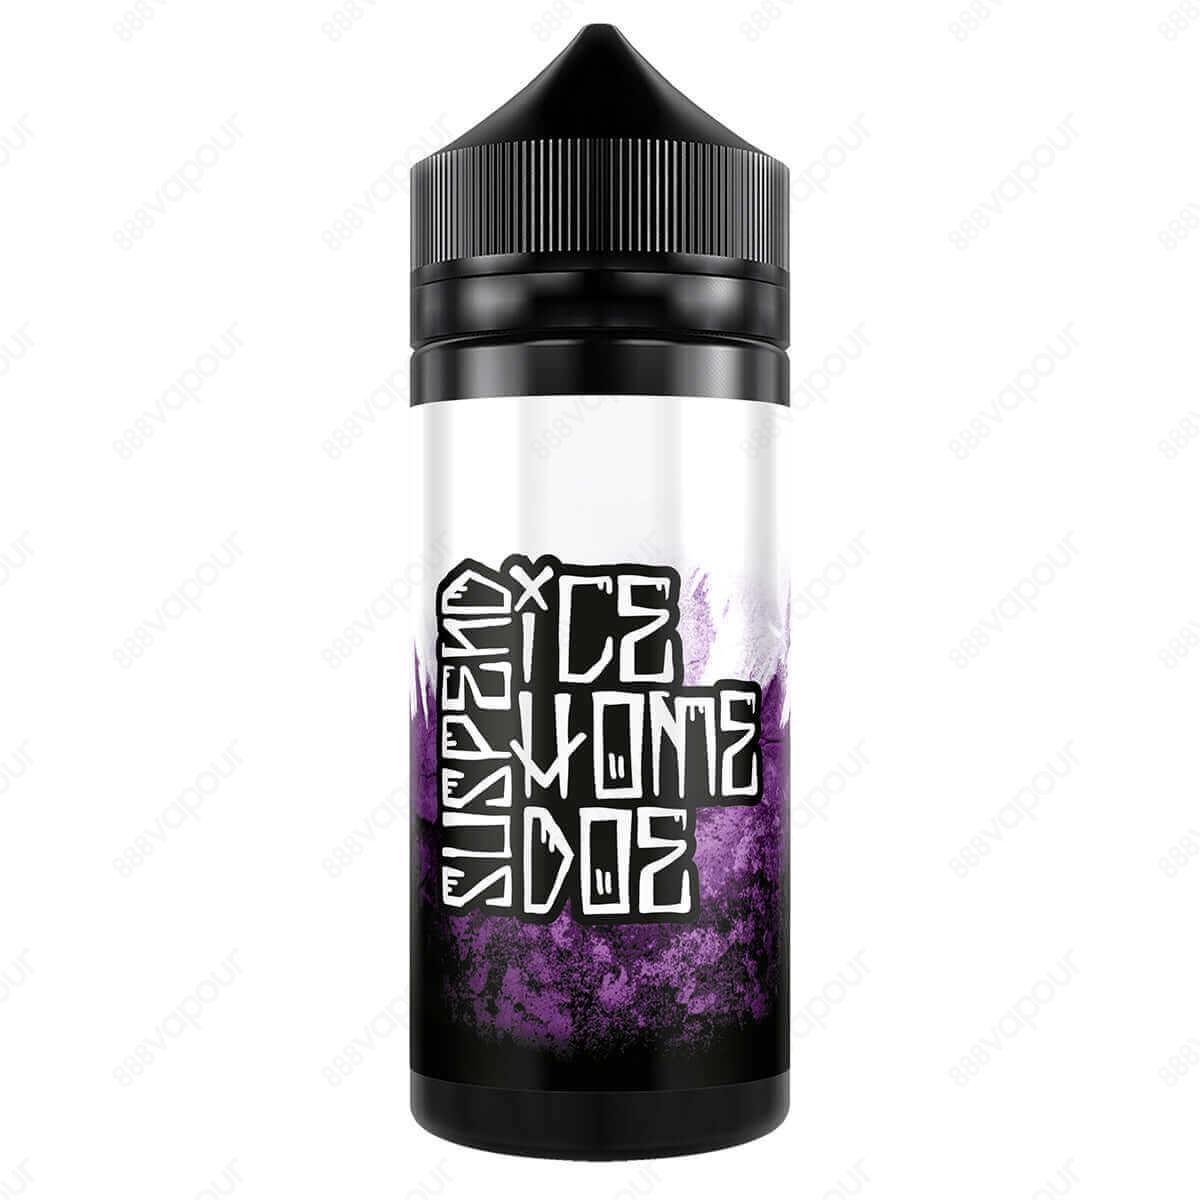 Ice Home Doe Suspend E-Liquid | £14.99 | 888 Vapour | Ice Home Doe Suspend e-liquid is a fresh mix of blackcurrants and cold menthol. Suspend by Ice Home Doe is available in a 100ml 0mg shortfill, with space to add two 10ml 18mg nicotine shots to create 1